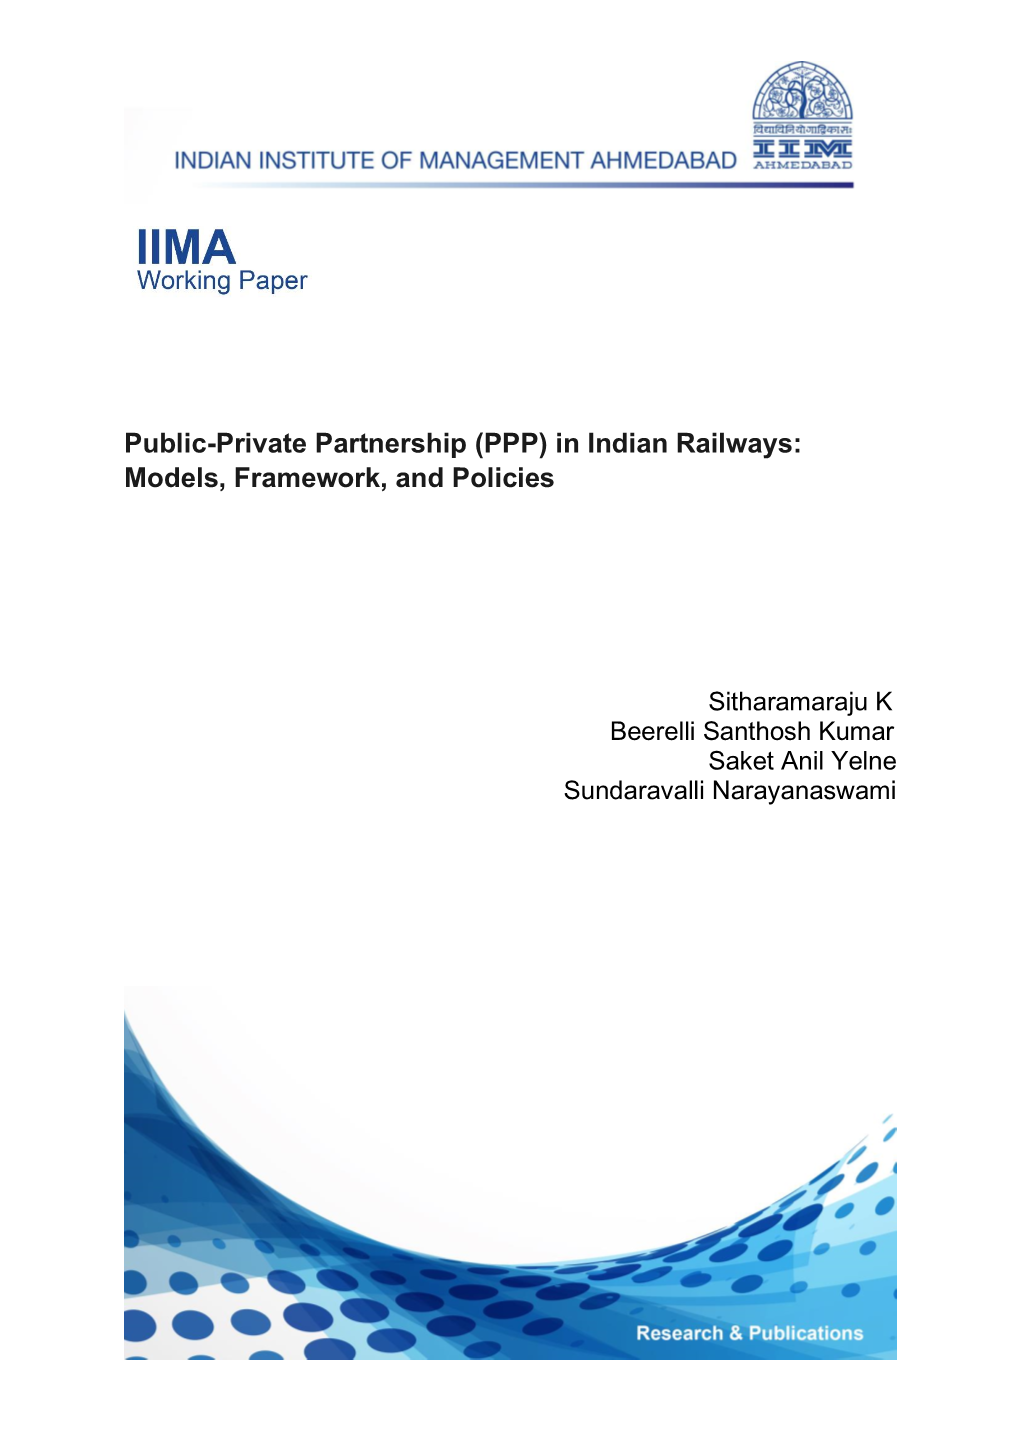 Public-Private Partnership (PPP) in Indian Railways: Models, Framework, and Policies